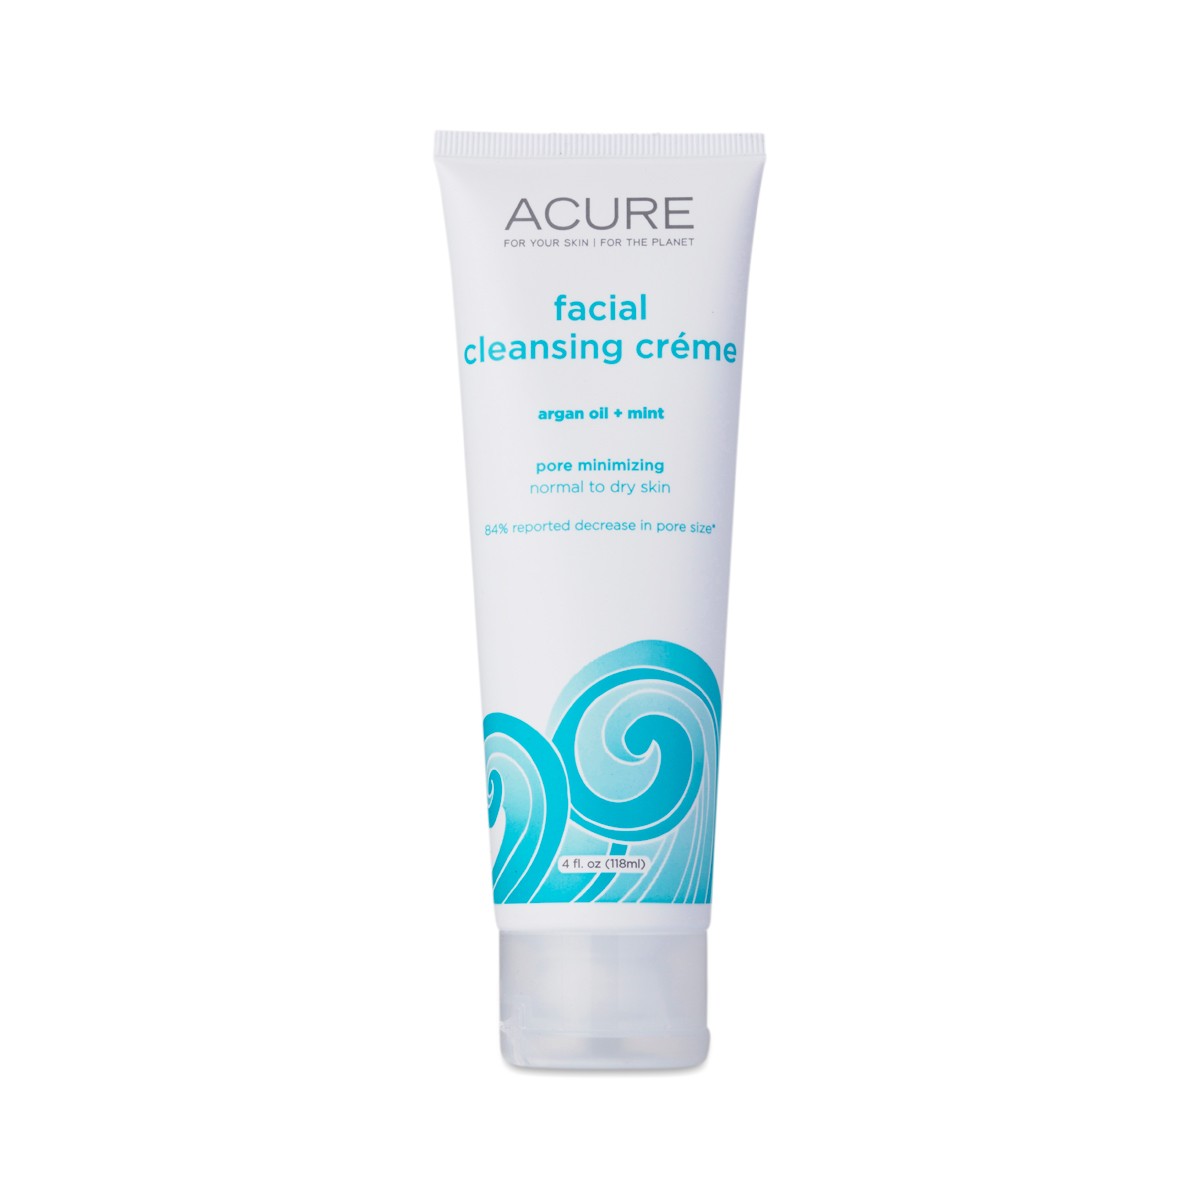 acure facial cleansing creme review